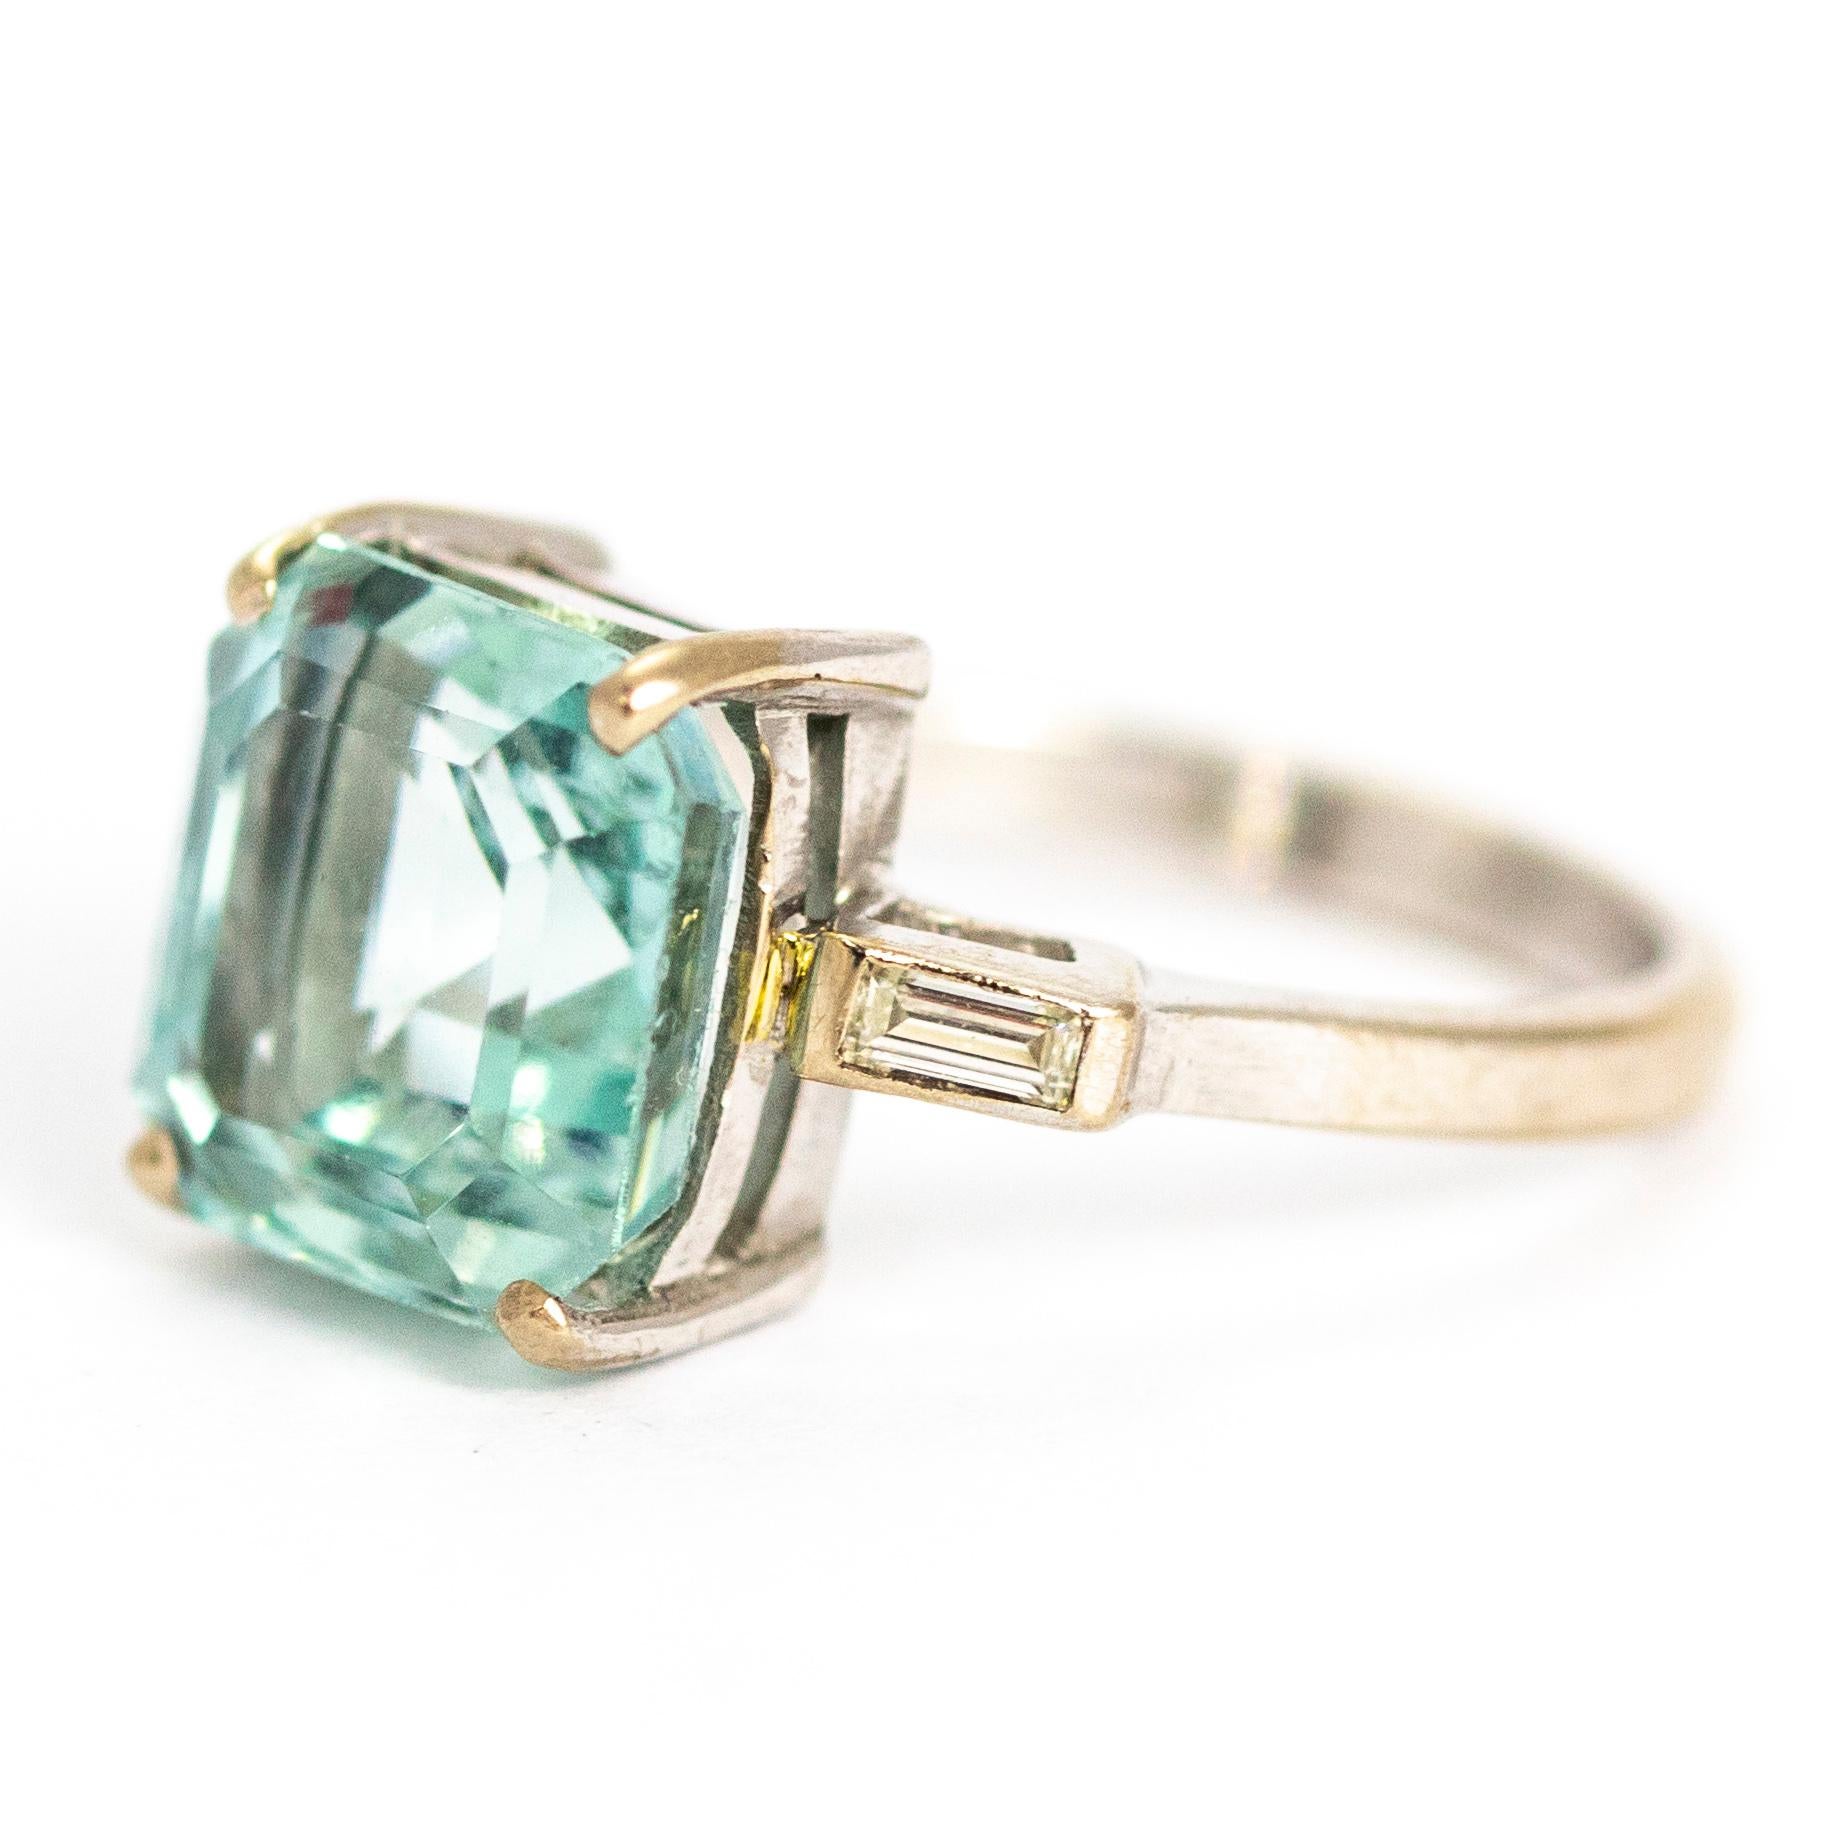 The half mirrors effect on this aqua is stunning! The octagonal cut Aqua stone is a beautiful place blue and reflects the light wonderfully. The shoulders feature baguette diamonds and the ring itself is modelled out of 18ct white gold. Made in